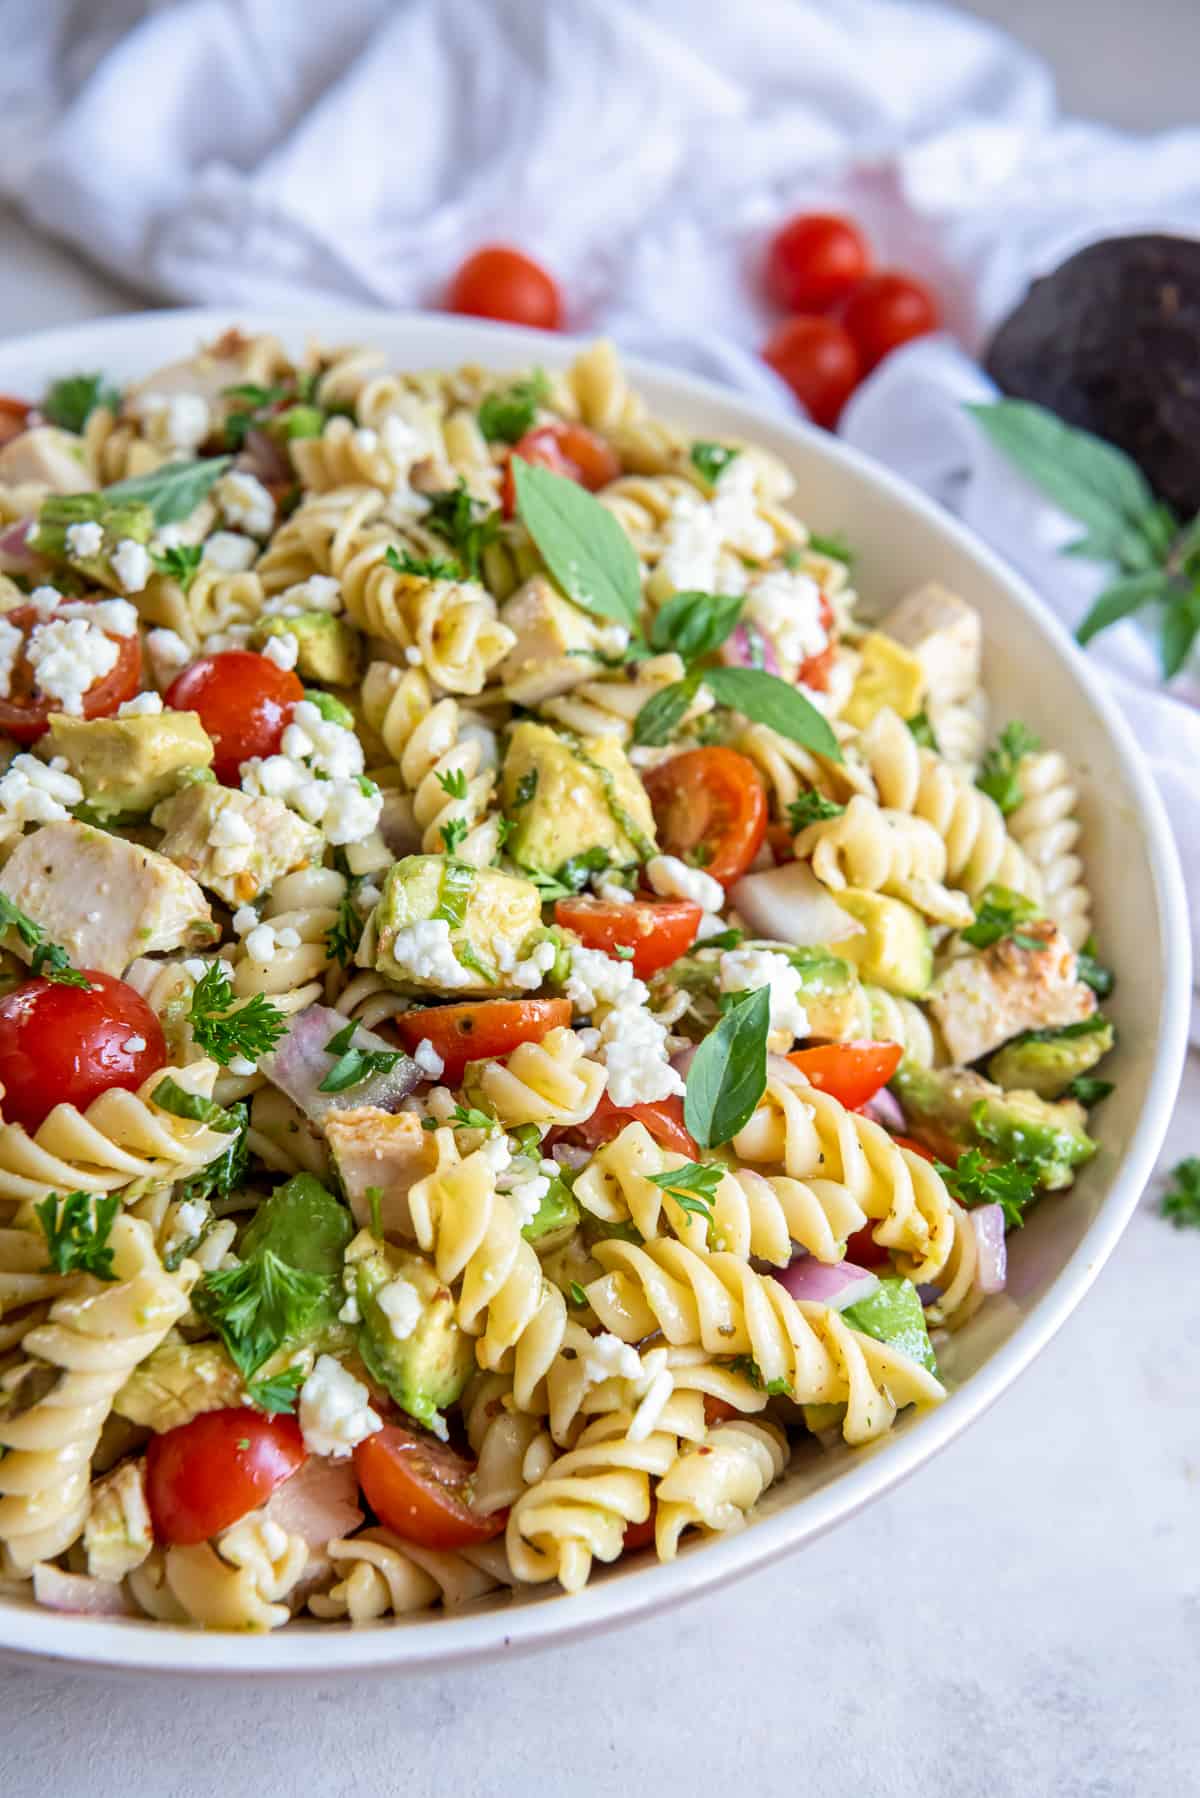 A side view of chicken avocado pasta salad in a white bowl.